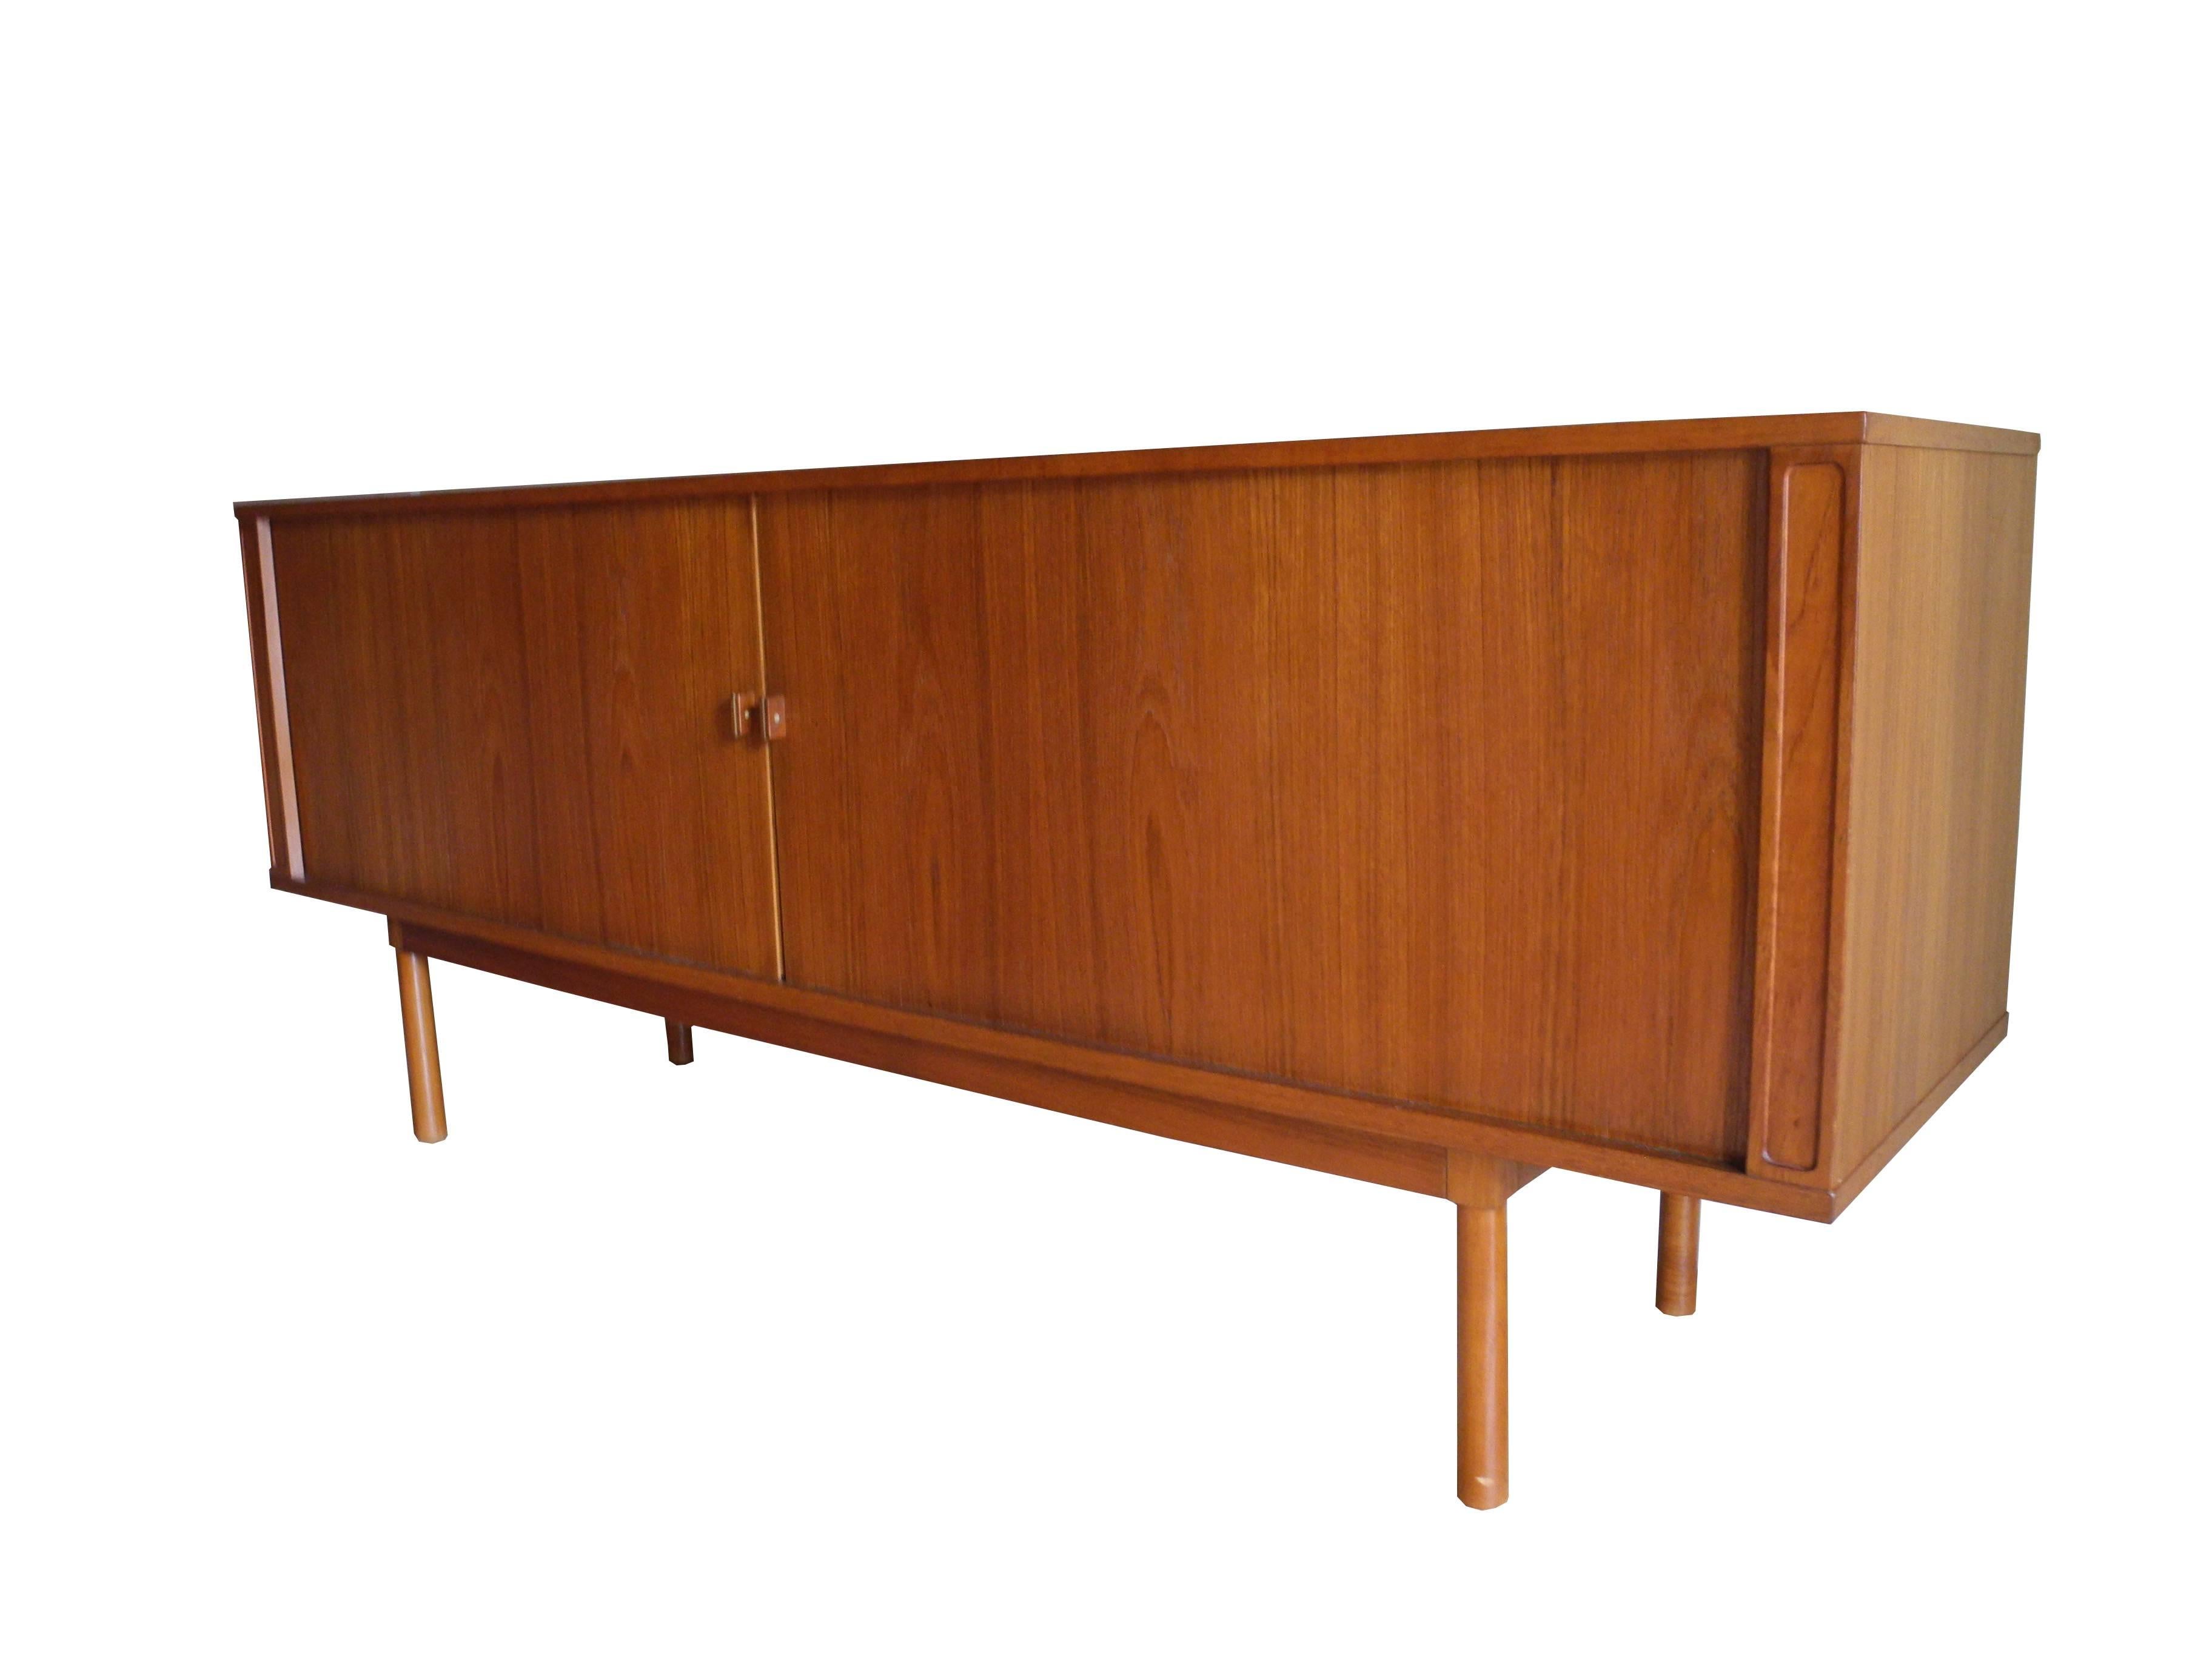 Stamped Løving, this Danish Modern, tamboured door sideboard, presents with a large amount of storage space. The side shelves are adjustable. The teak has a warm glow and the knobs have a brass accent.